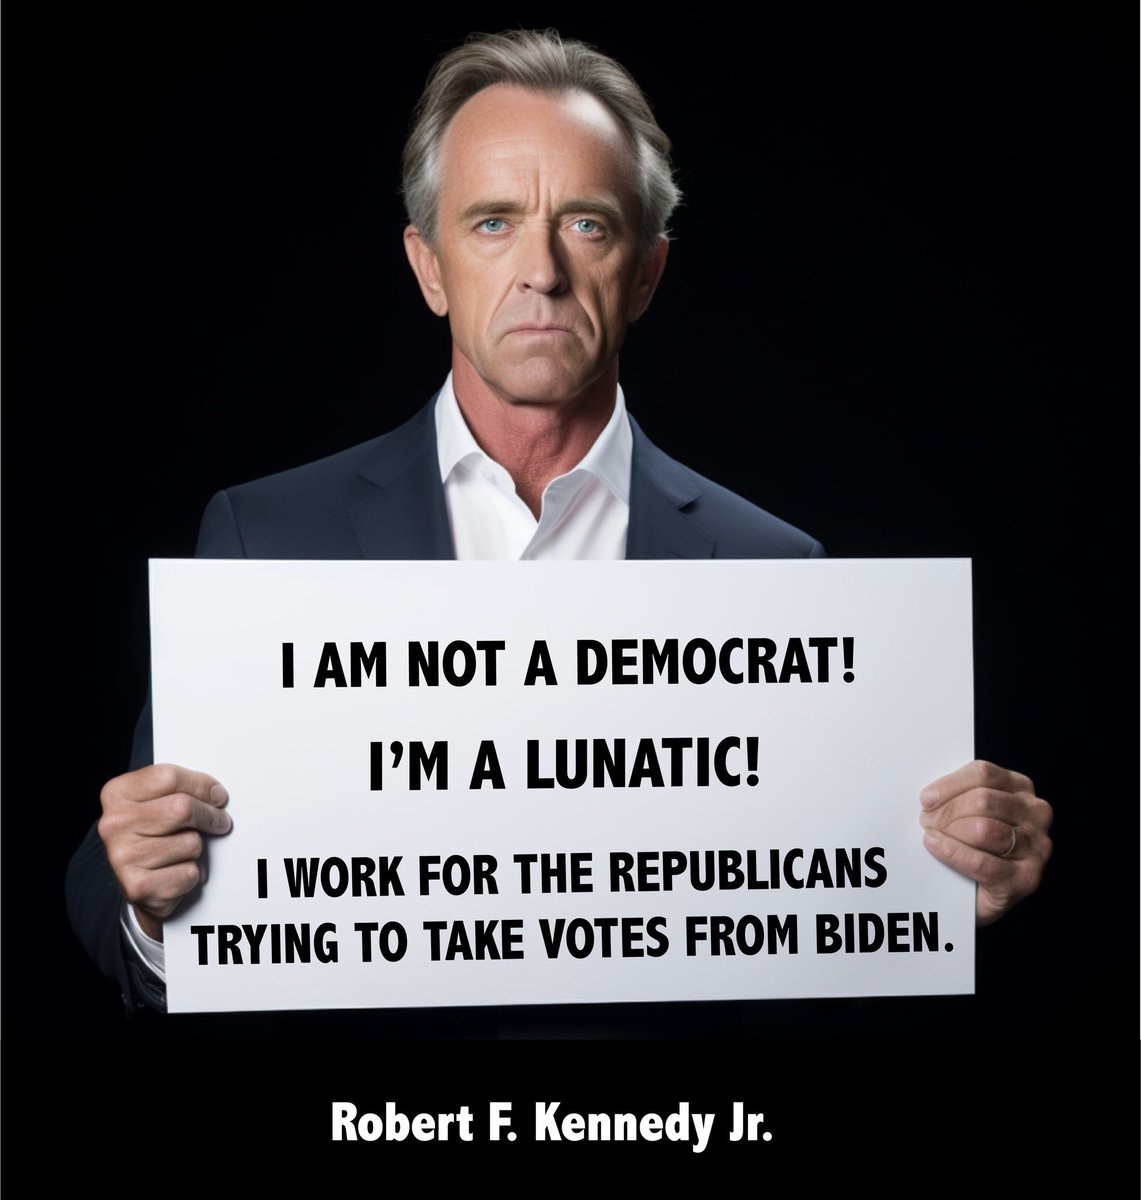 Robert F. Kennedy is not a Democrat. He is a Trump plant to bring chaos to the Democratic party, hurt Joe Biden, and help Fascist Trump take power.

Do not fall for this. Vote for Joe Biden because he really is a Democrat who loves America!
#FreshUnity
#4MoreYears